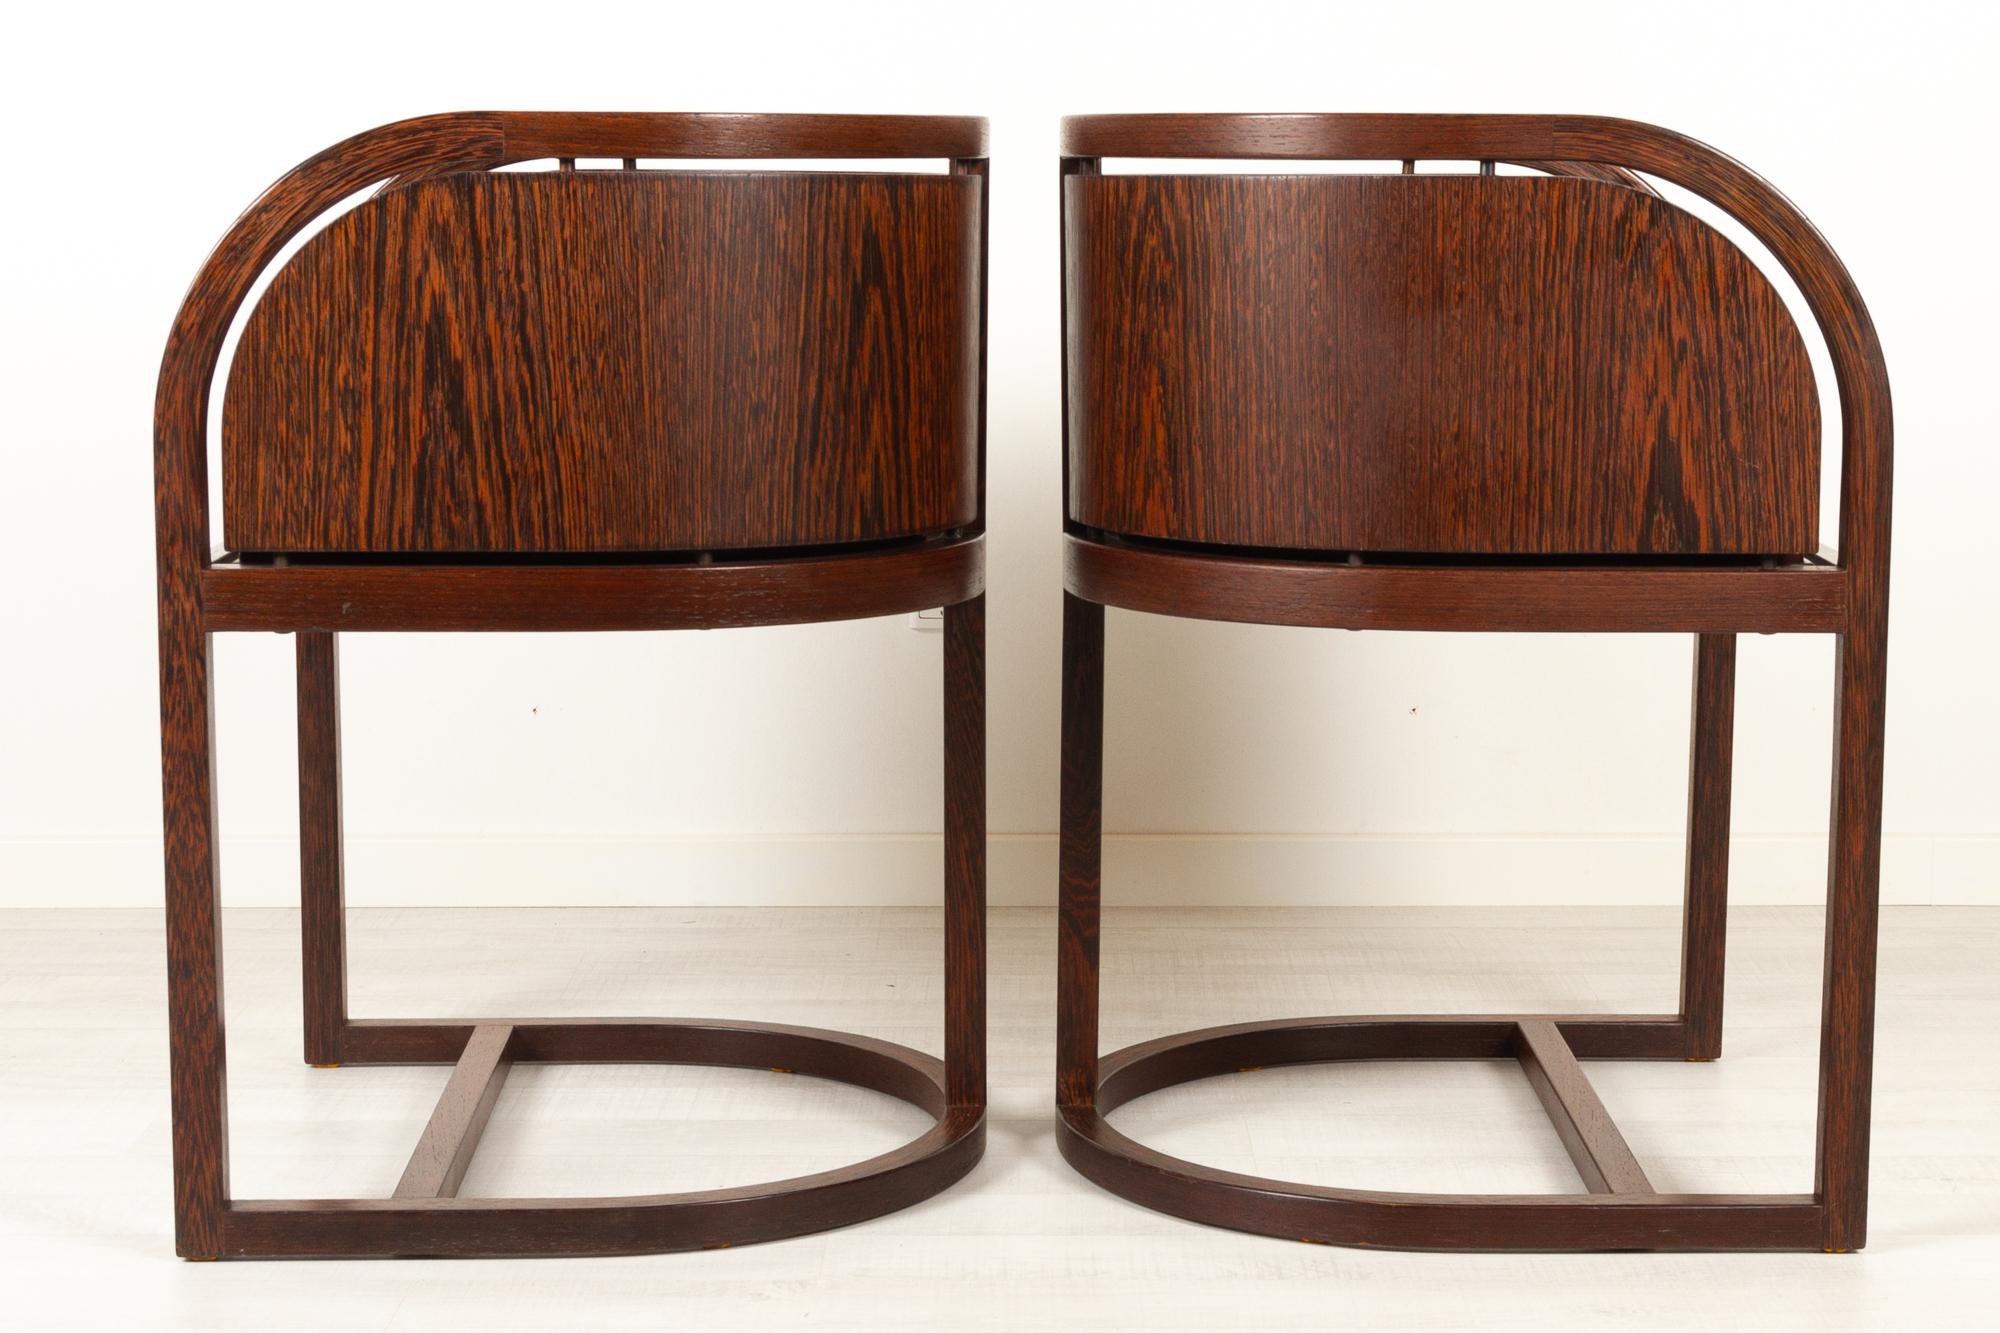 Wenge Pair of Danish Wengé Armchairs by Thorup & Bonderup, 1970s